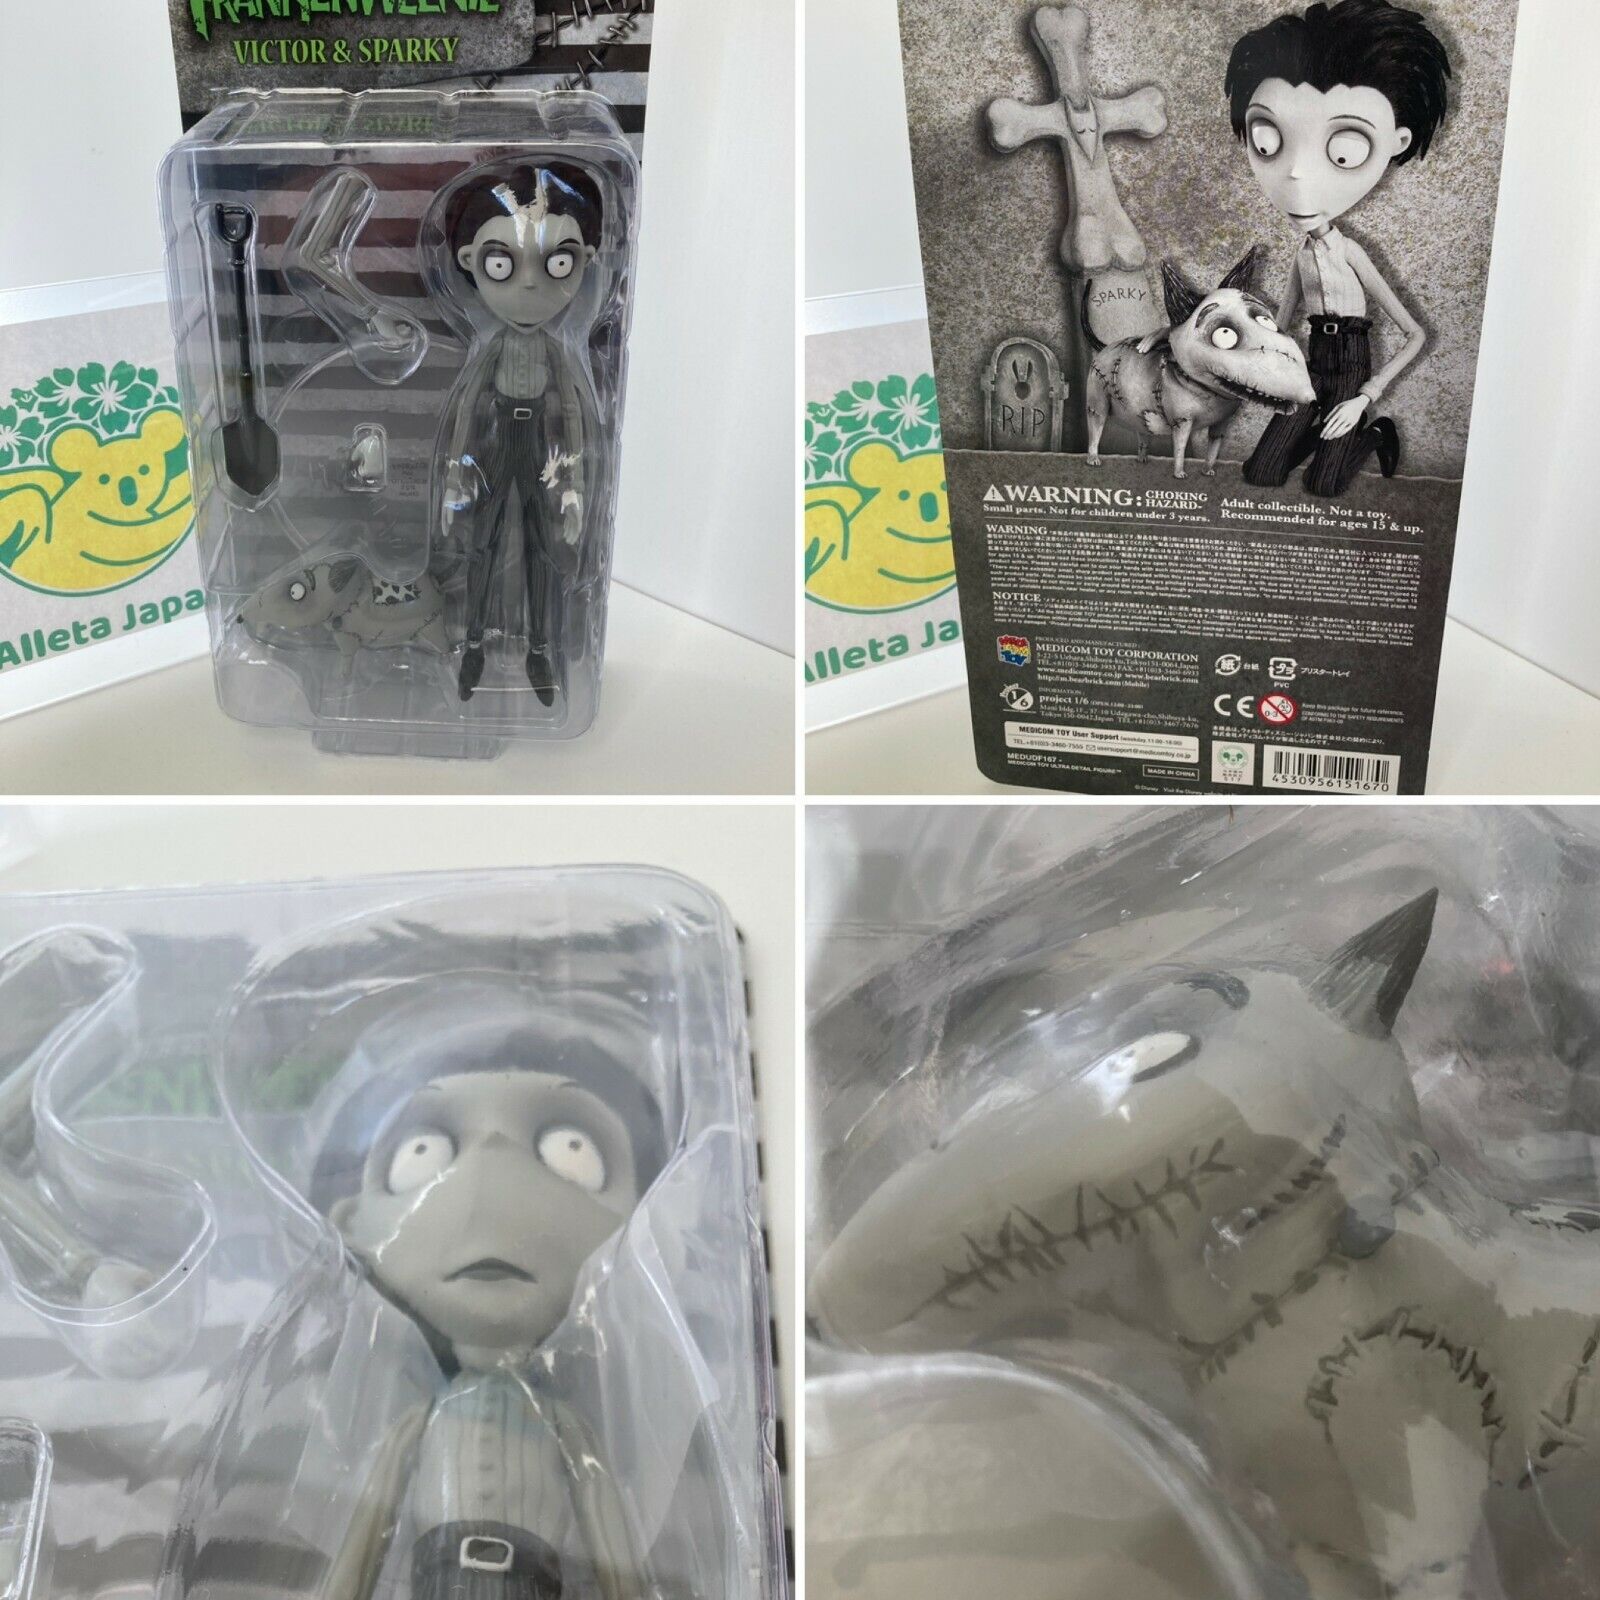 FRANKENWEENIE VICTOR SPARKY Action Figure Medicom Toy Disney Character Toy 